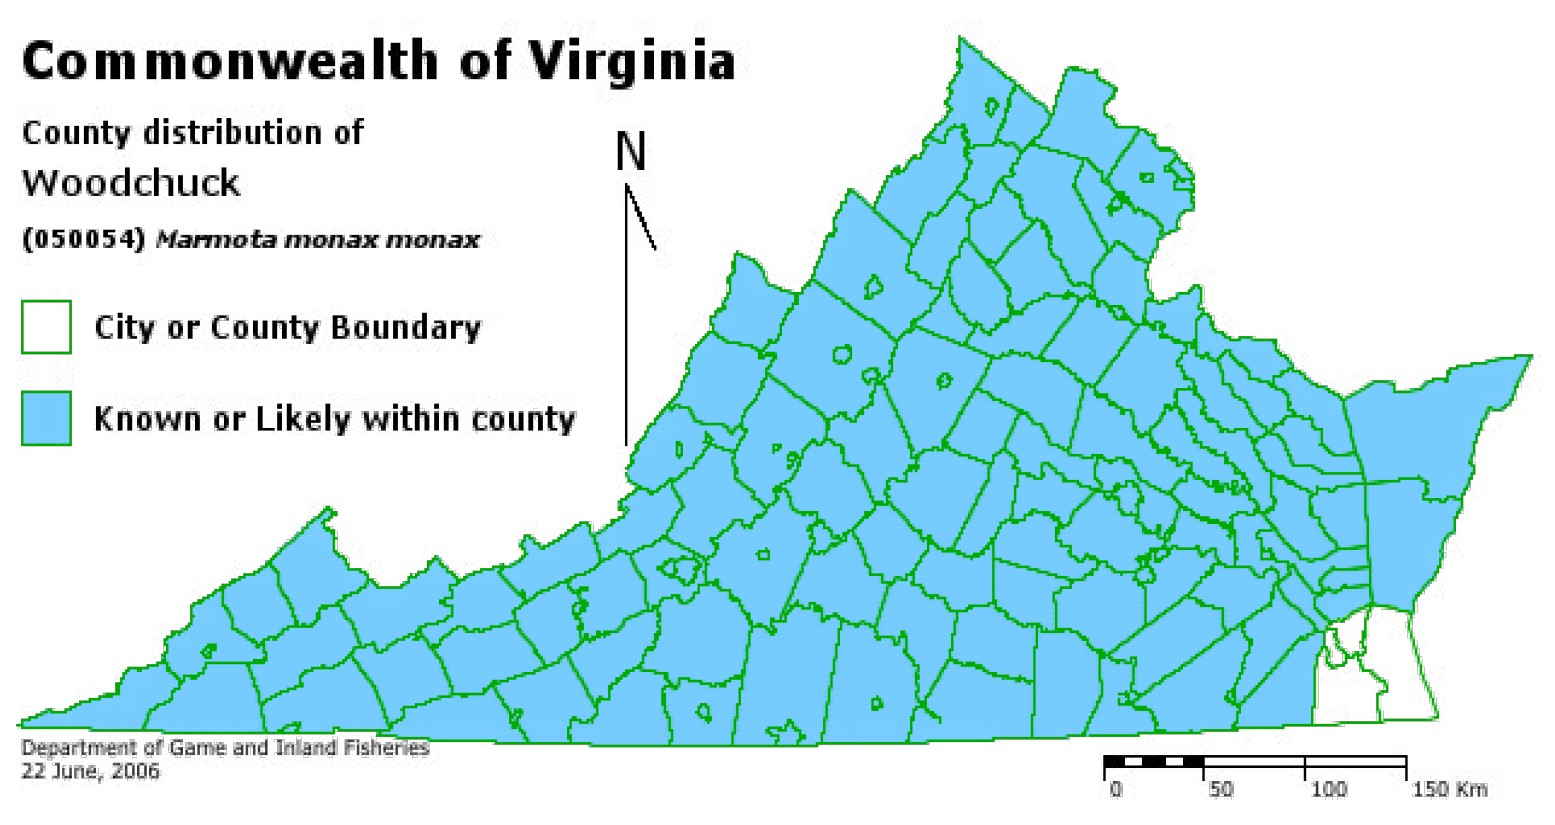 County map of Virginia shaded to indicate where the woodchuck is found.